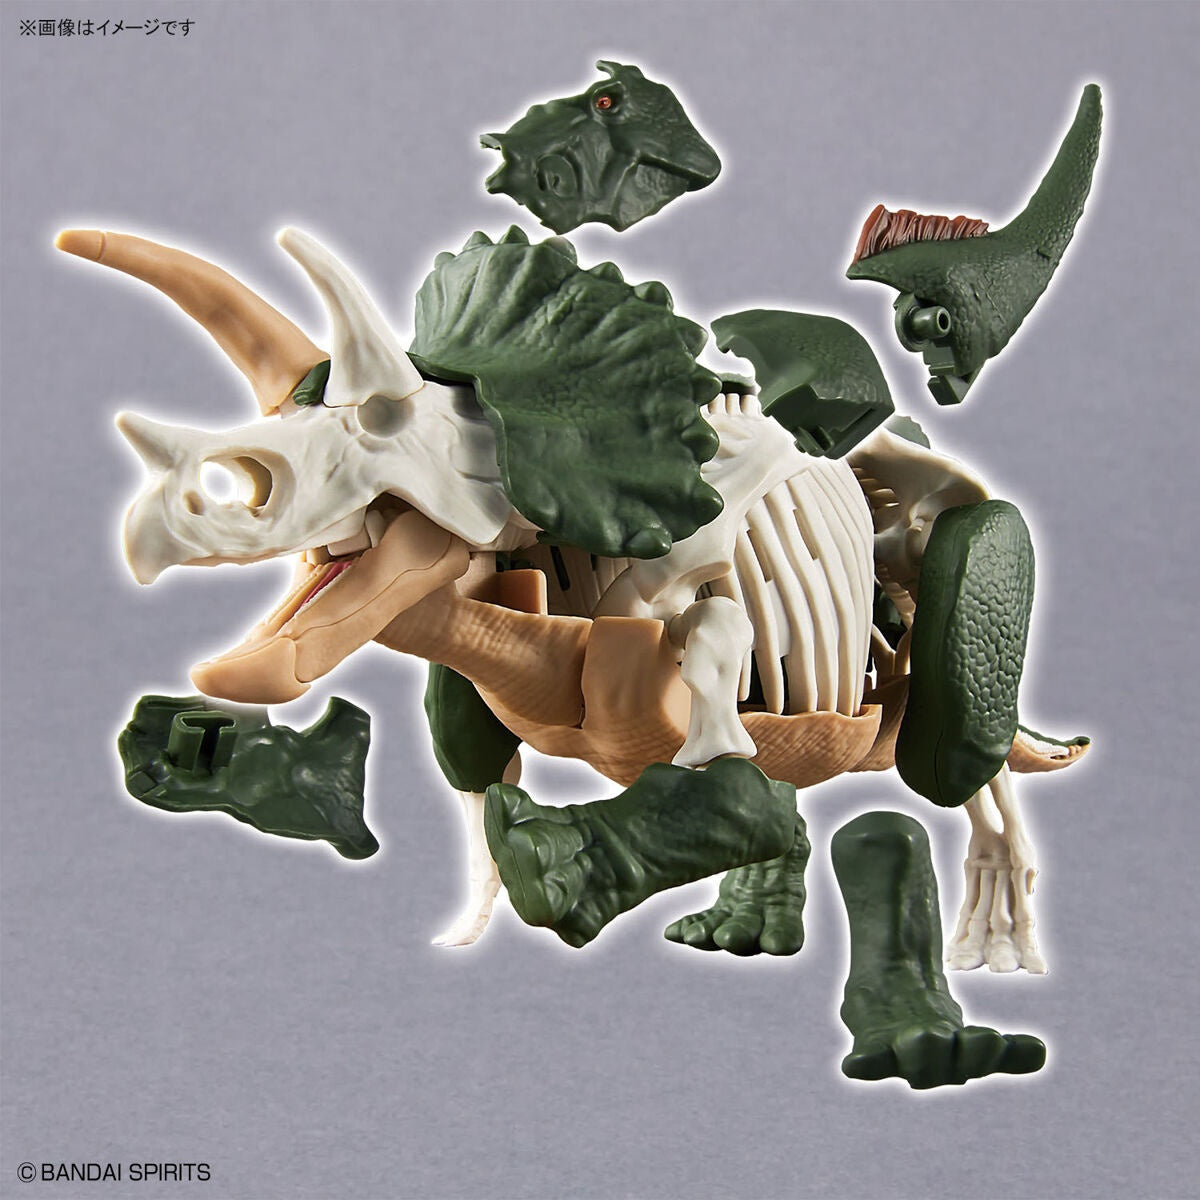 New Dinosaur Plastic Model Kit Brand &quot;Triceratops&quot;-Bandai-Ace Cards &amp; Collectibles